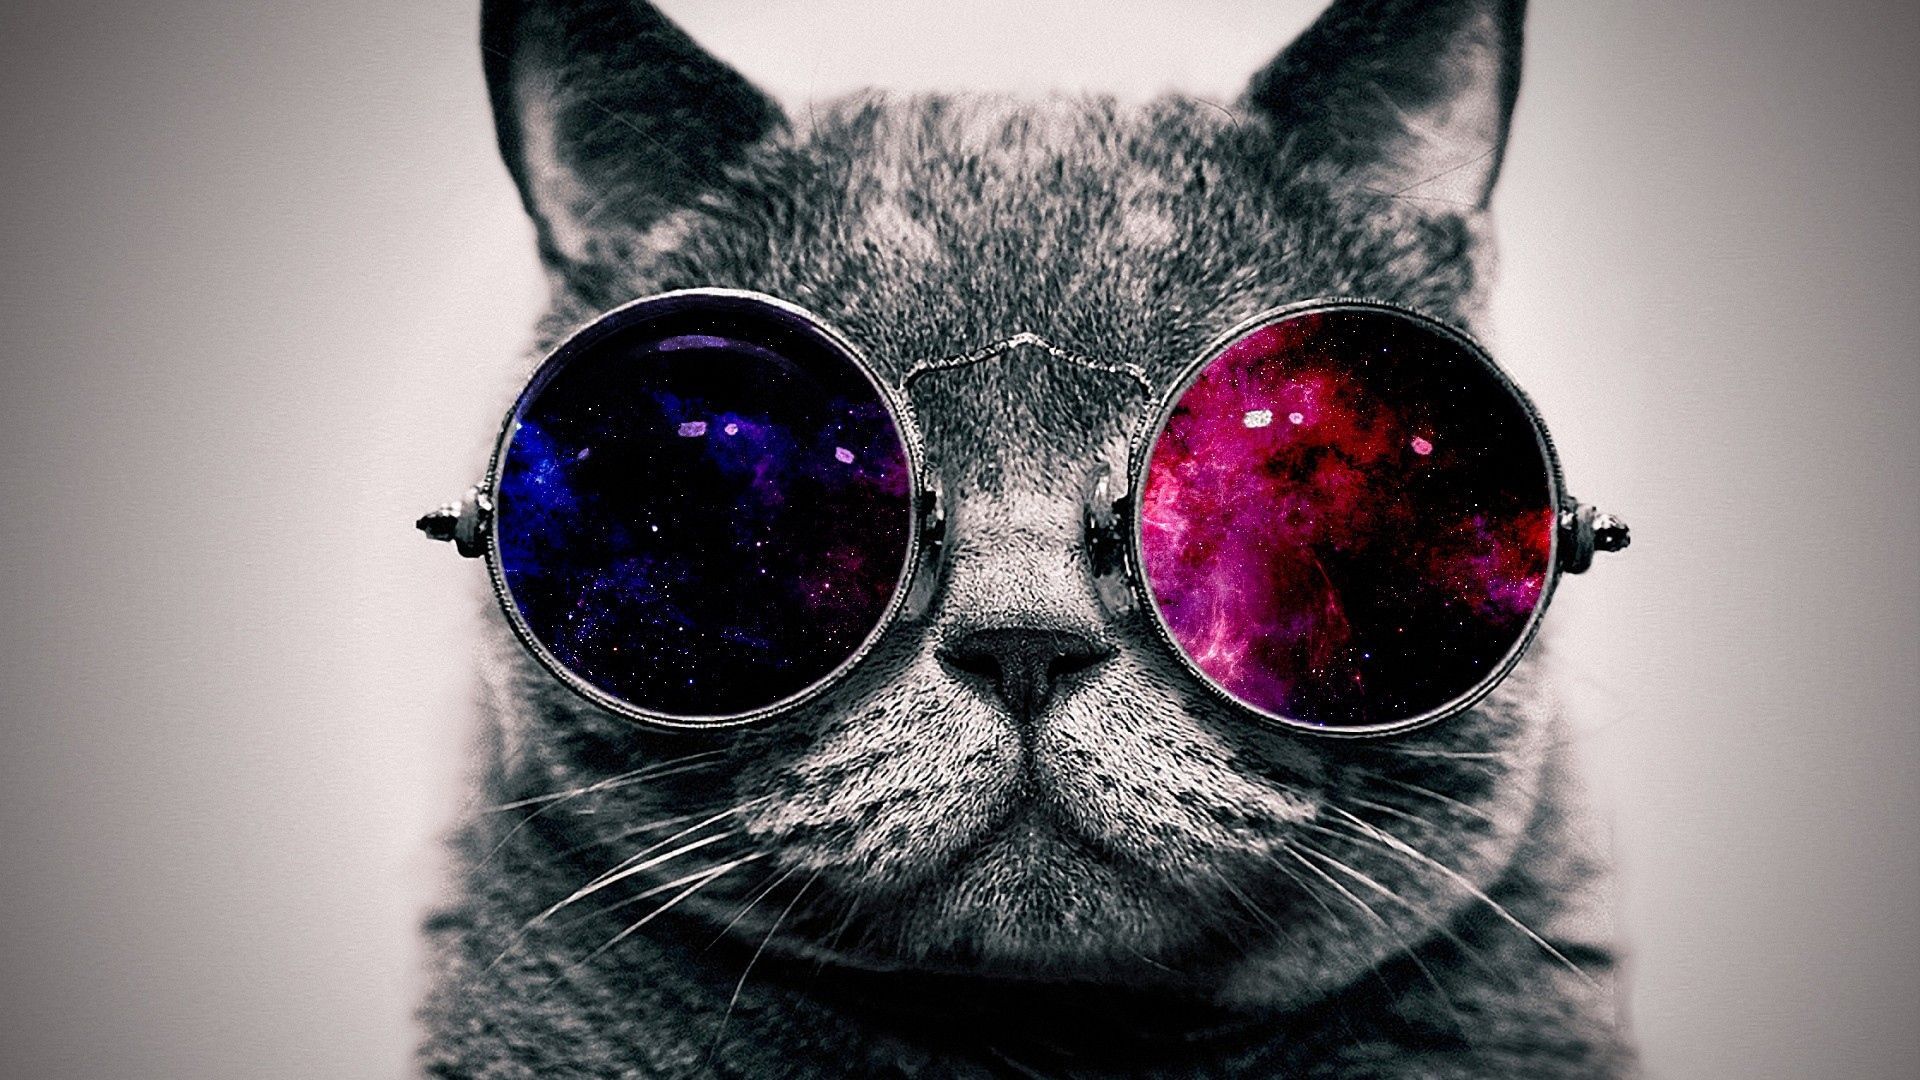 Download Wallpaper 1920x1080 Cat, Face, Glasses, Thick Full HD ...